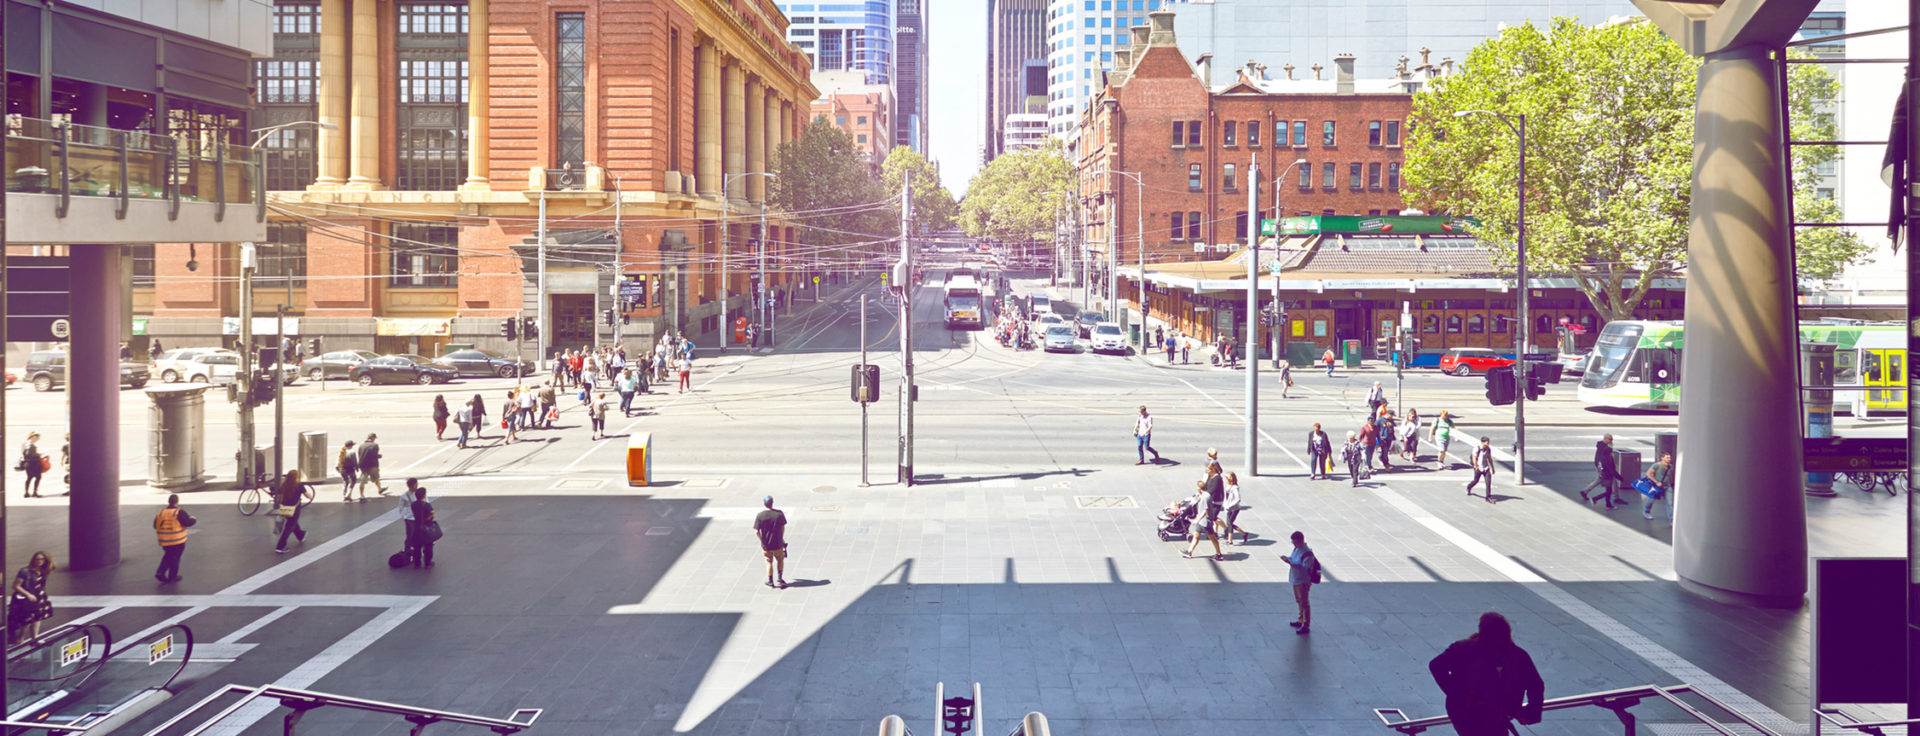 Melbourne transport station connected by Quectel IoT module